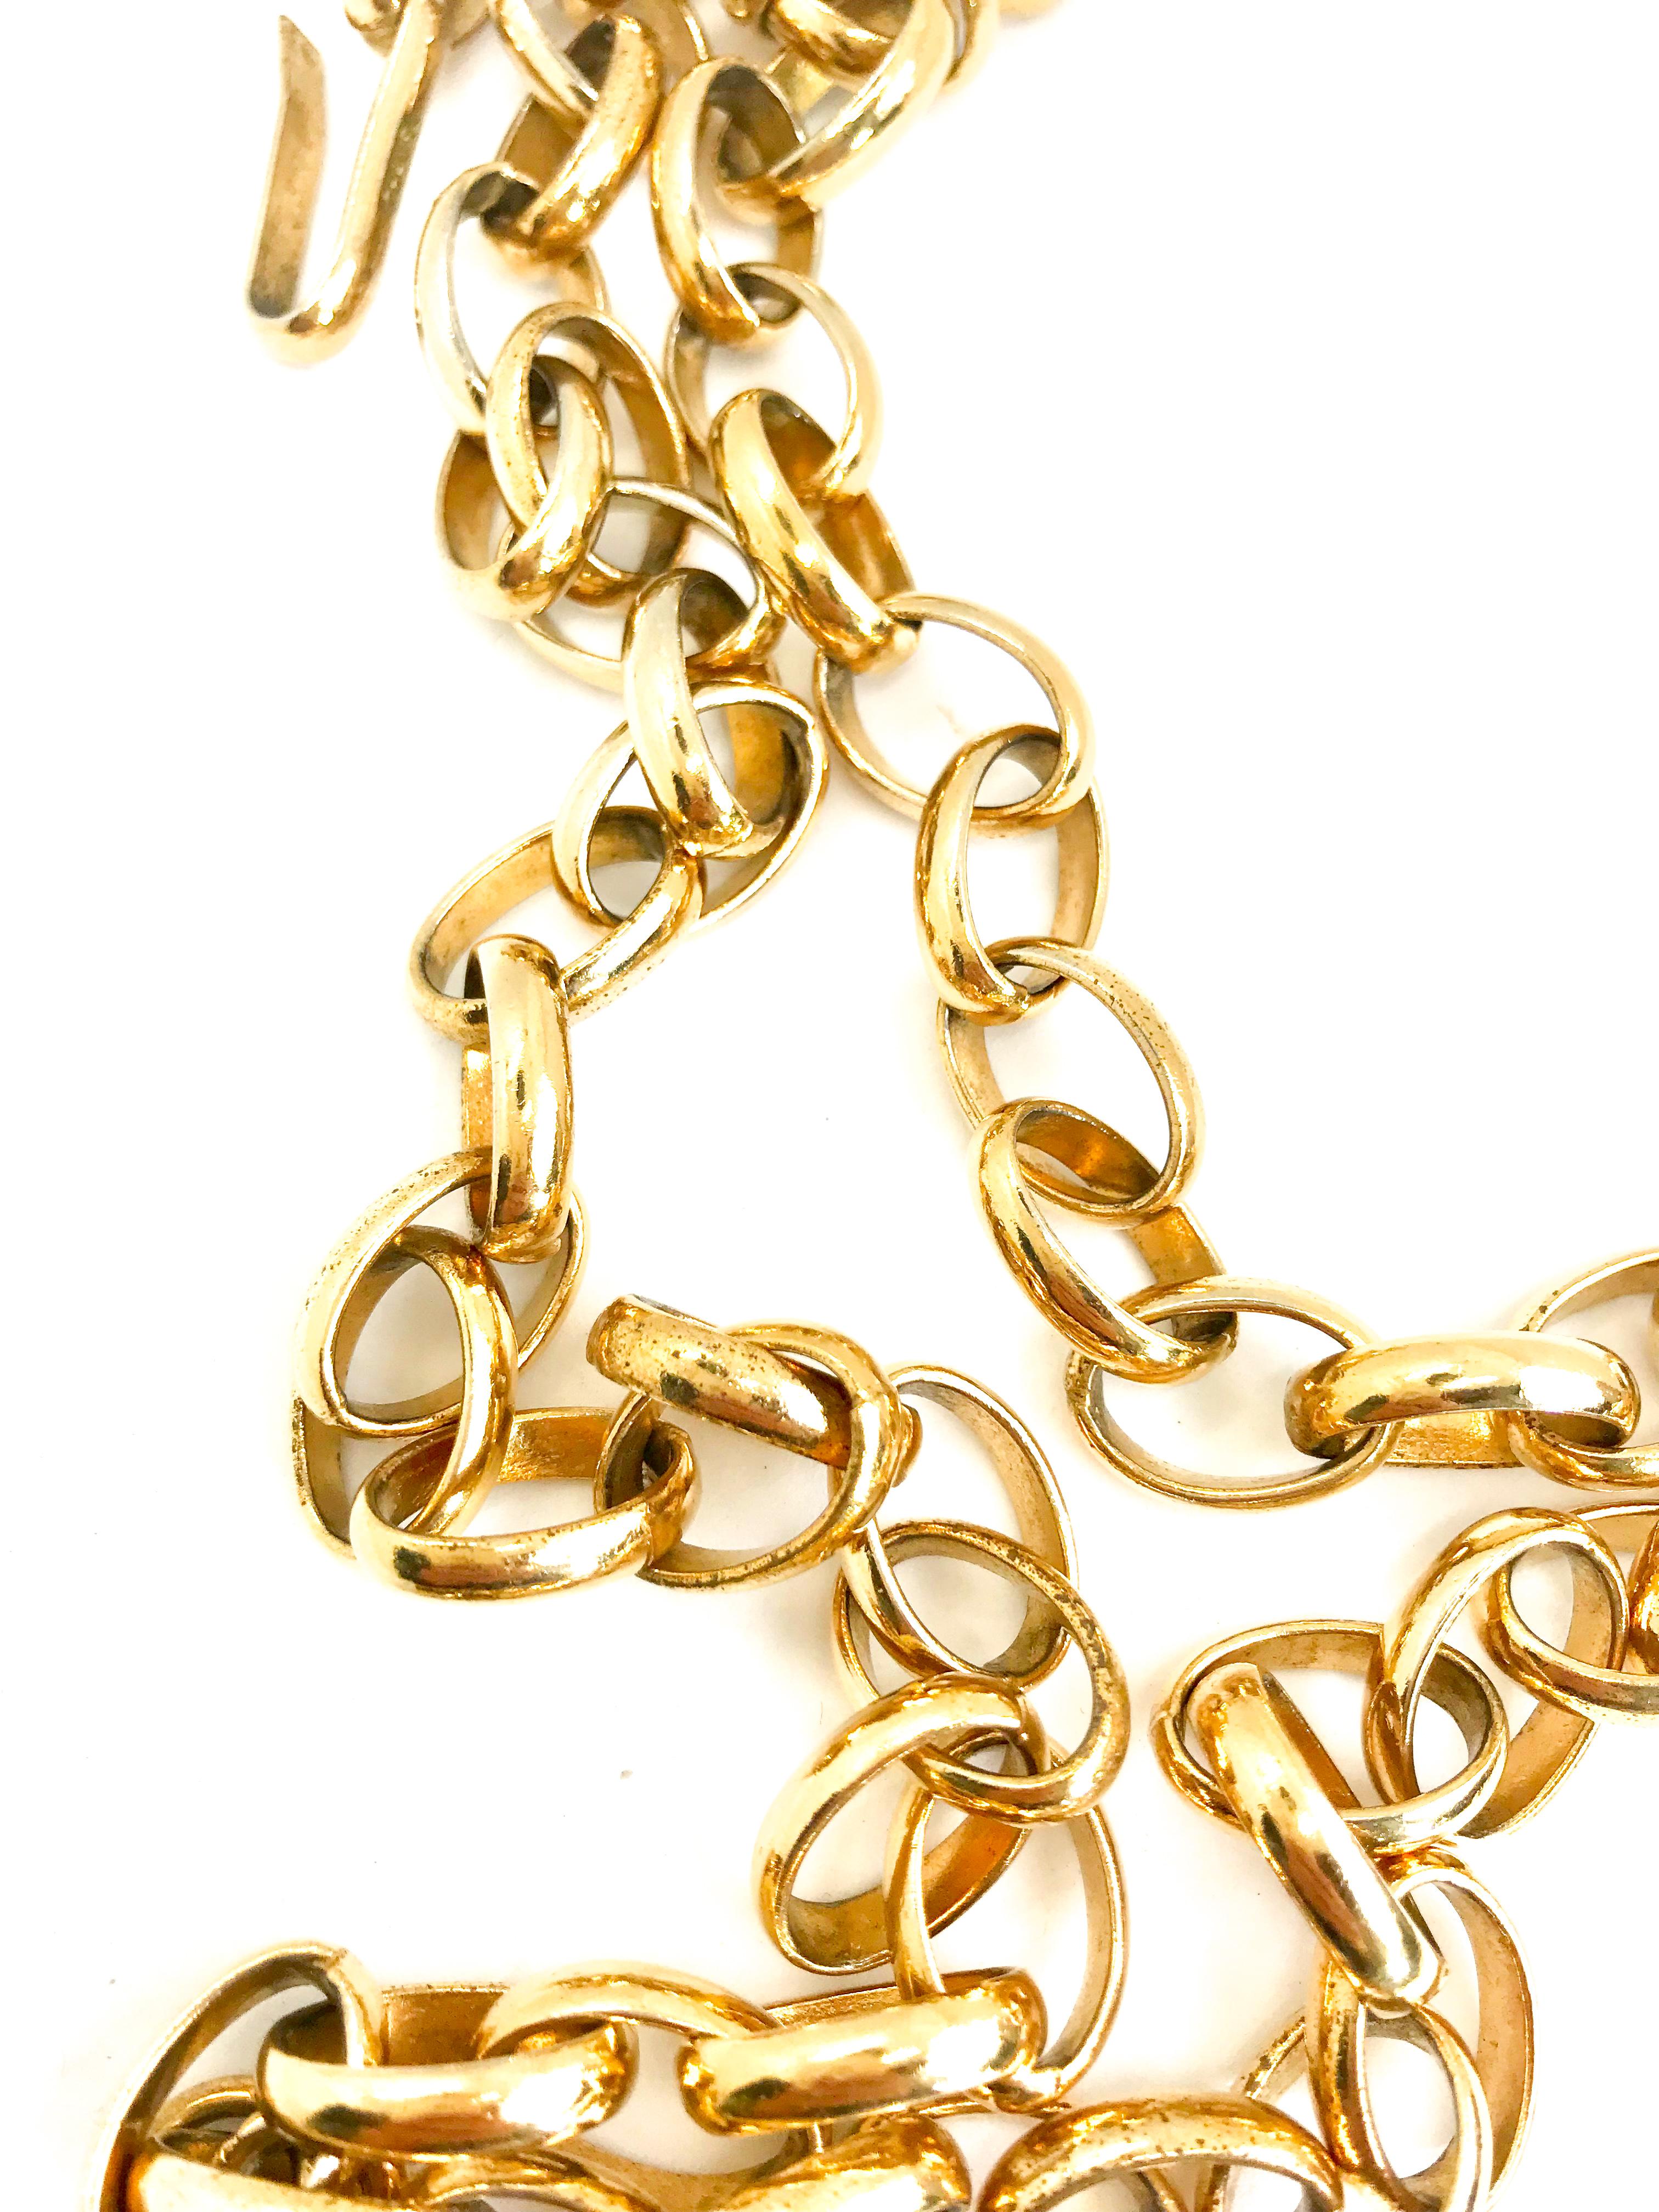 Huge Chanel 1980s vintage gold plated cutout pendant necklace / belt.  Chanel your inner 90s supermodel!

Features Chanel stamp on hook which was used briefly in the early 80s.  Long chunky chain which can be worn as a necklace or belt.

Chain